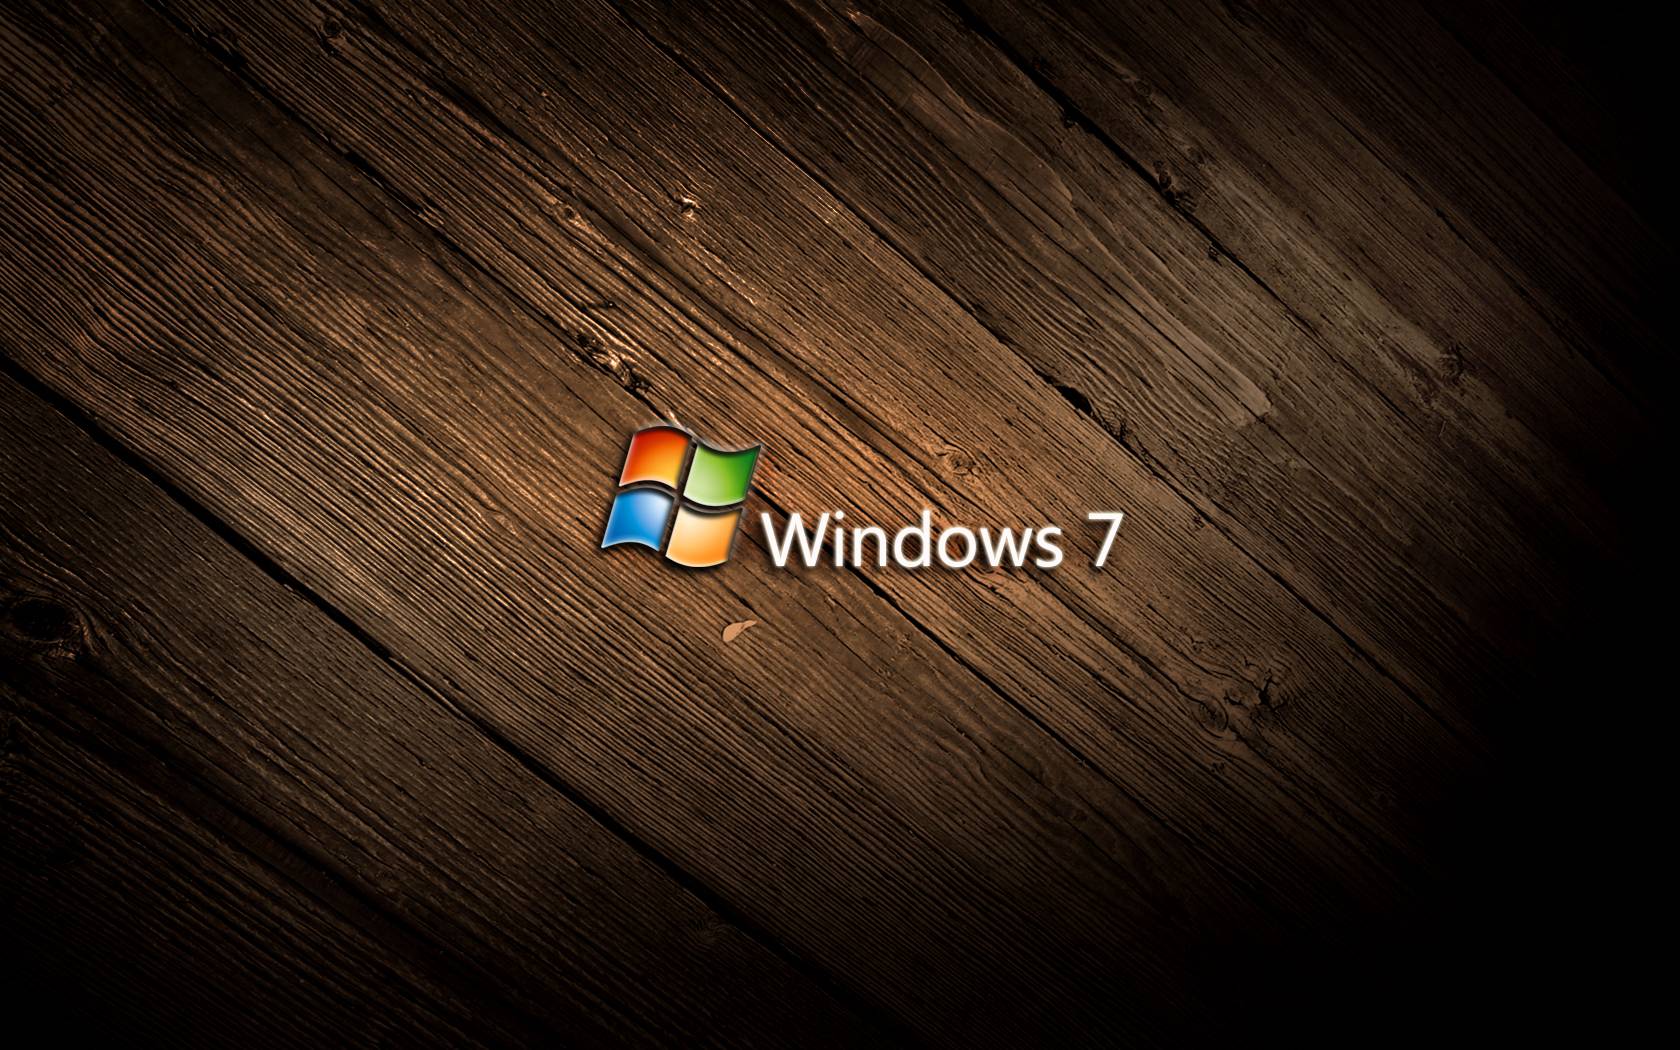 Download 26 Cool Windows 7 Wallpaper HD. The Android Review